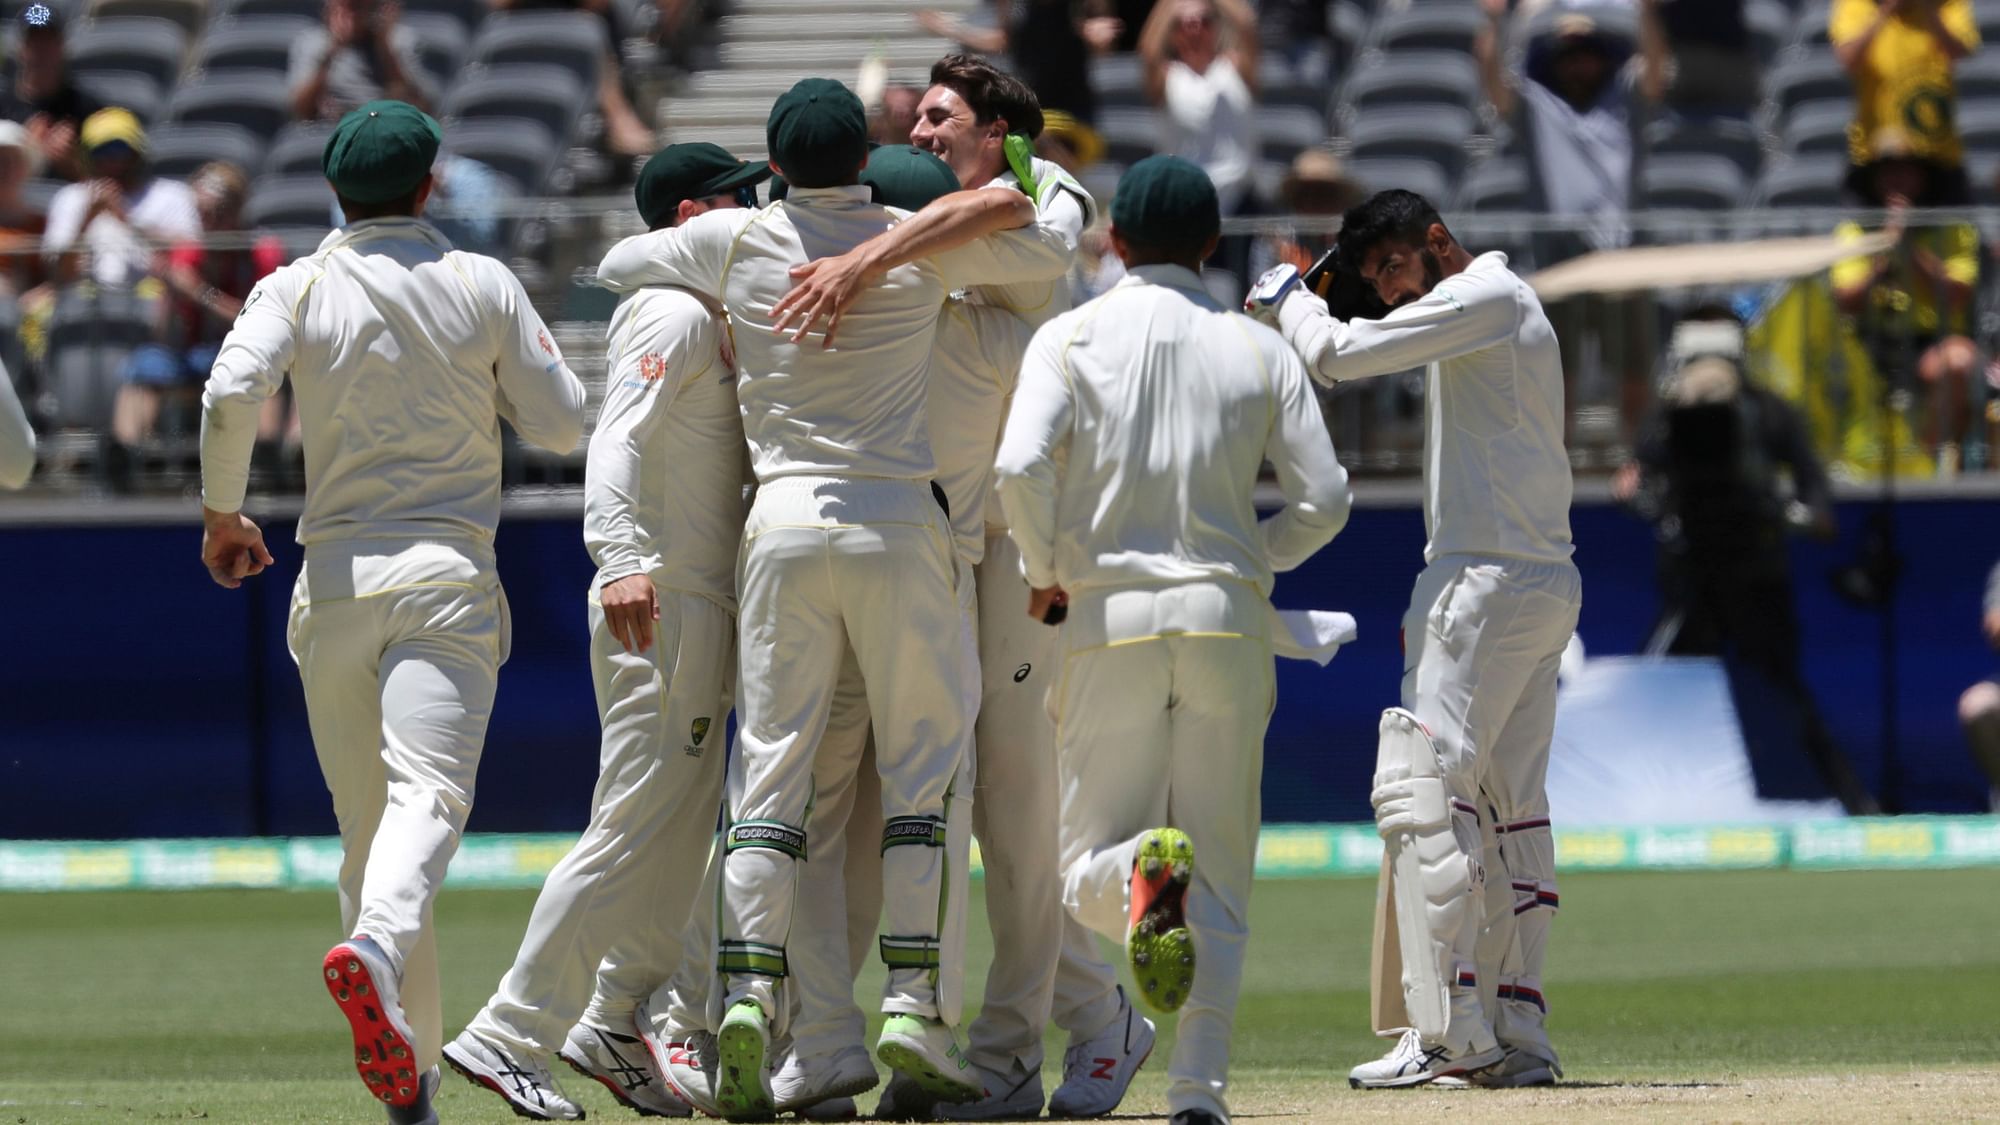 India were dismissed for 140 runs in their second innings on the fifth and final day.